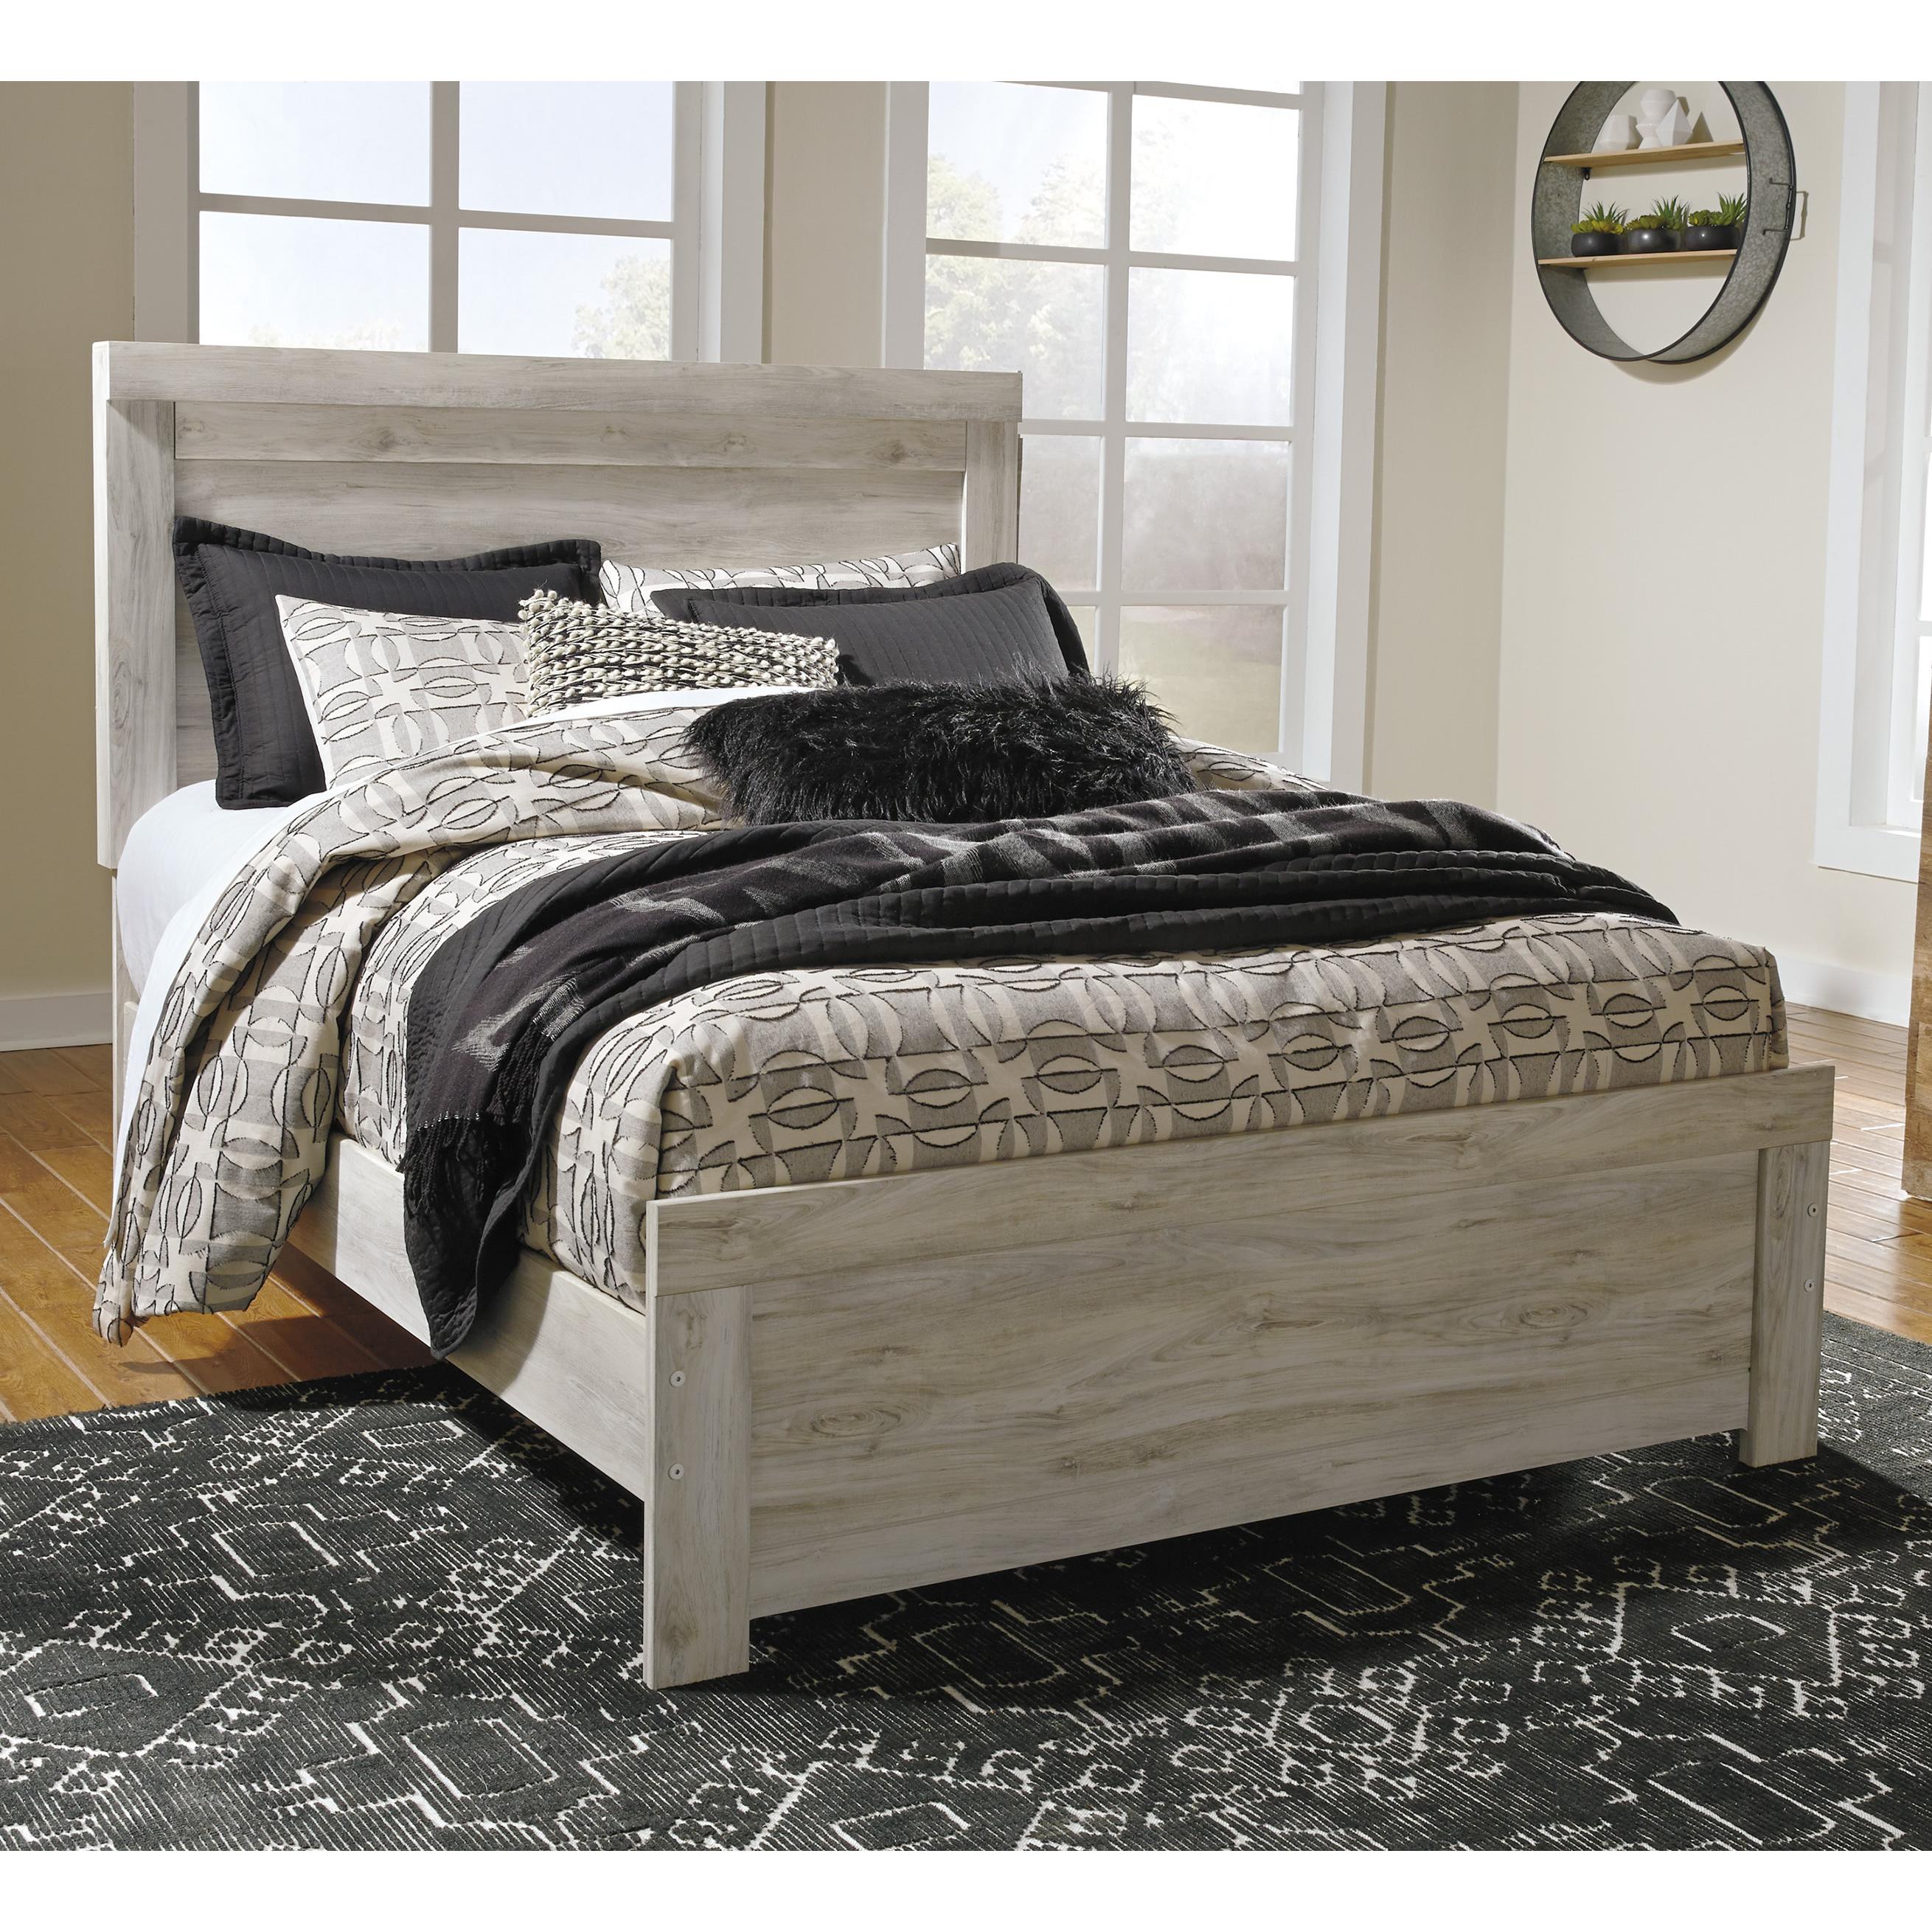 Signature Design by Ashley Bellaby Queen Panel Bed B331-57/B331-54/B331-96